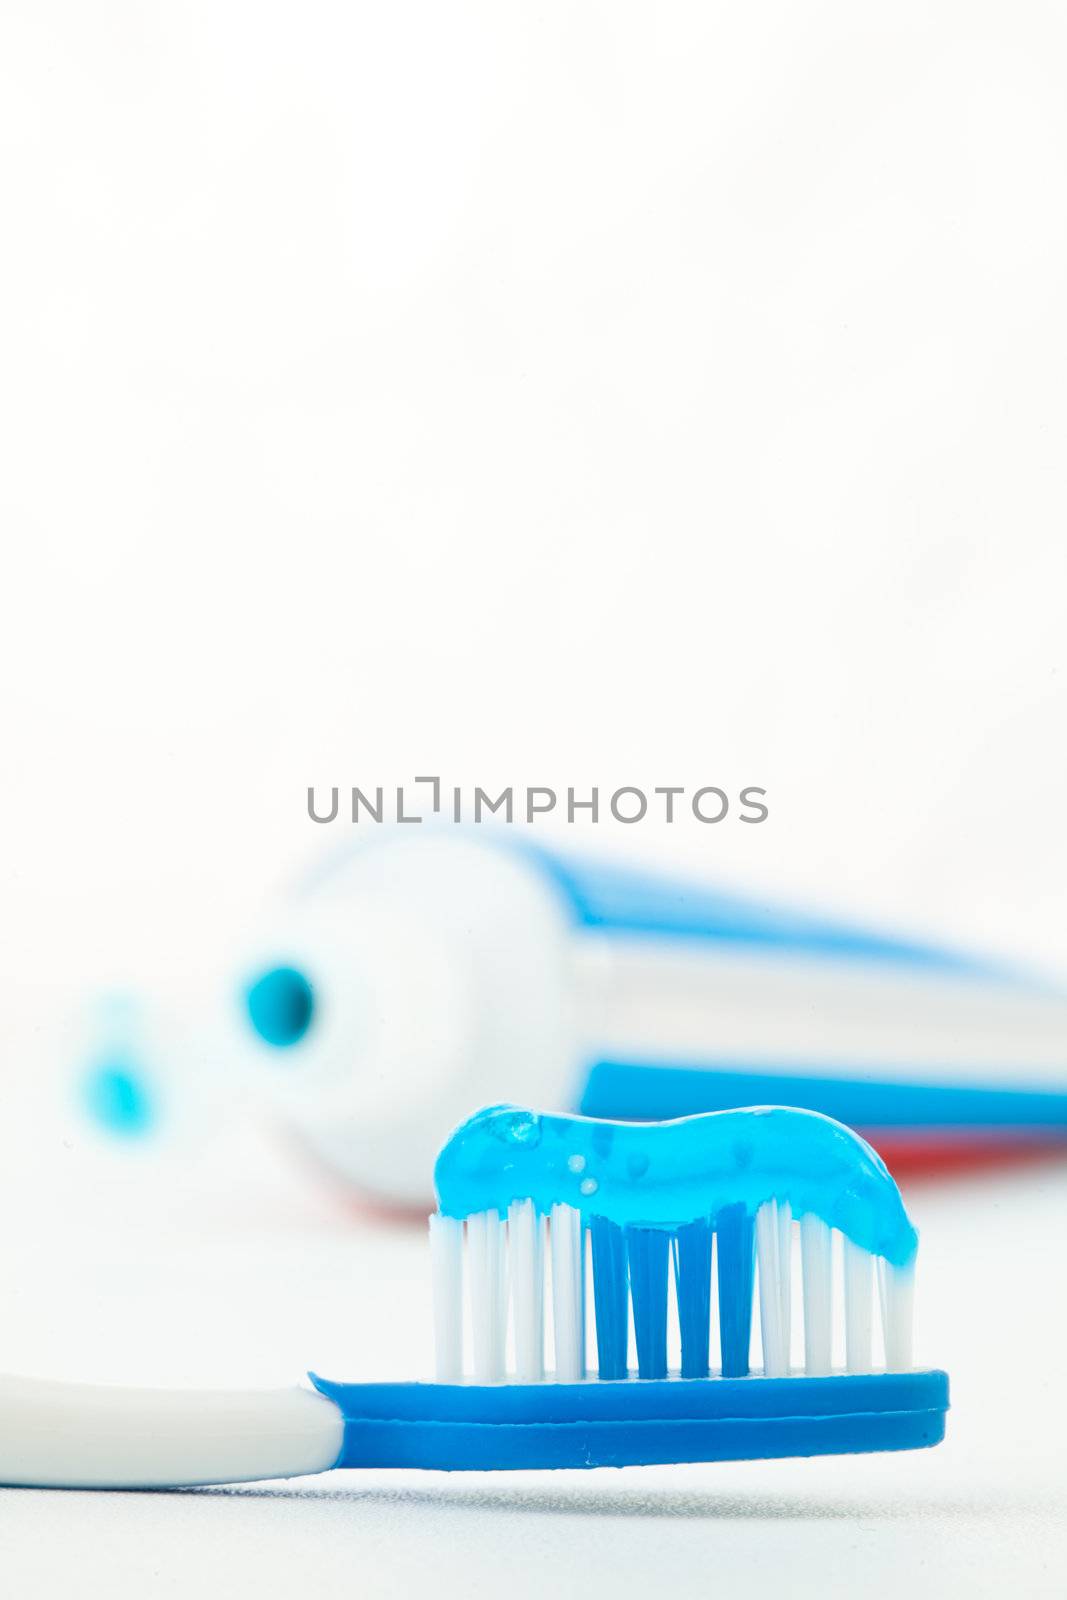 Toothpaste next to a toothbrush against white background